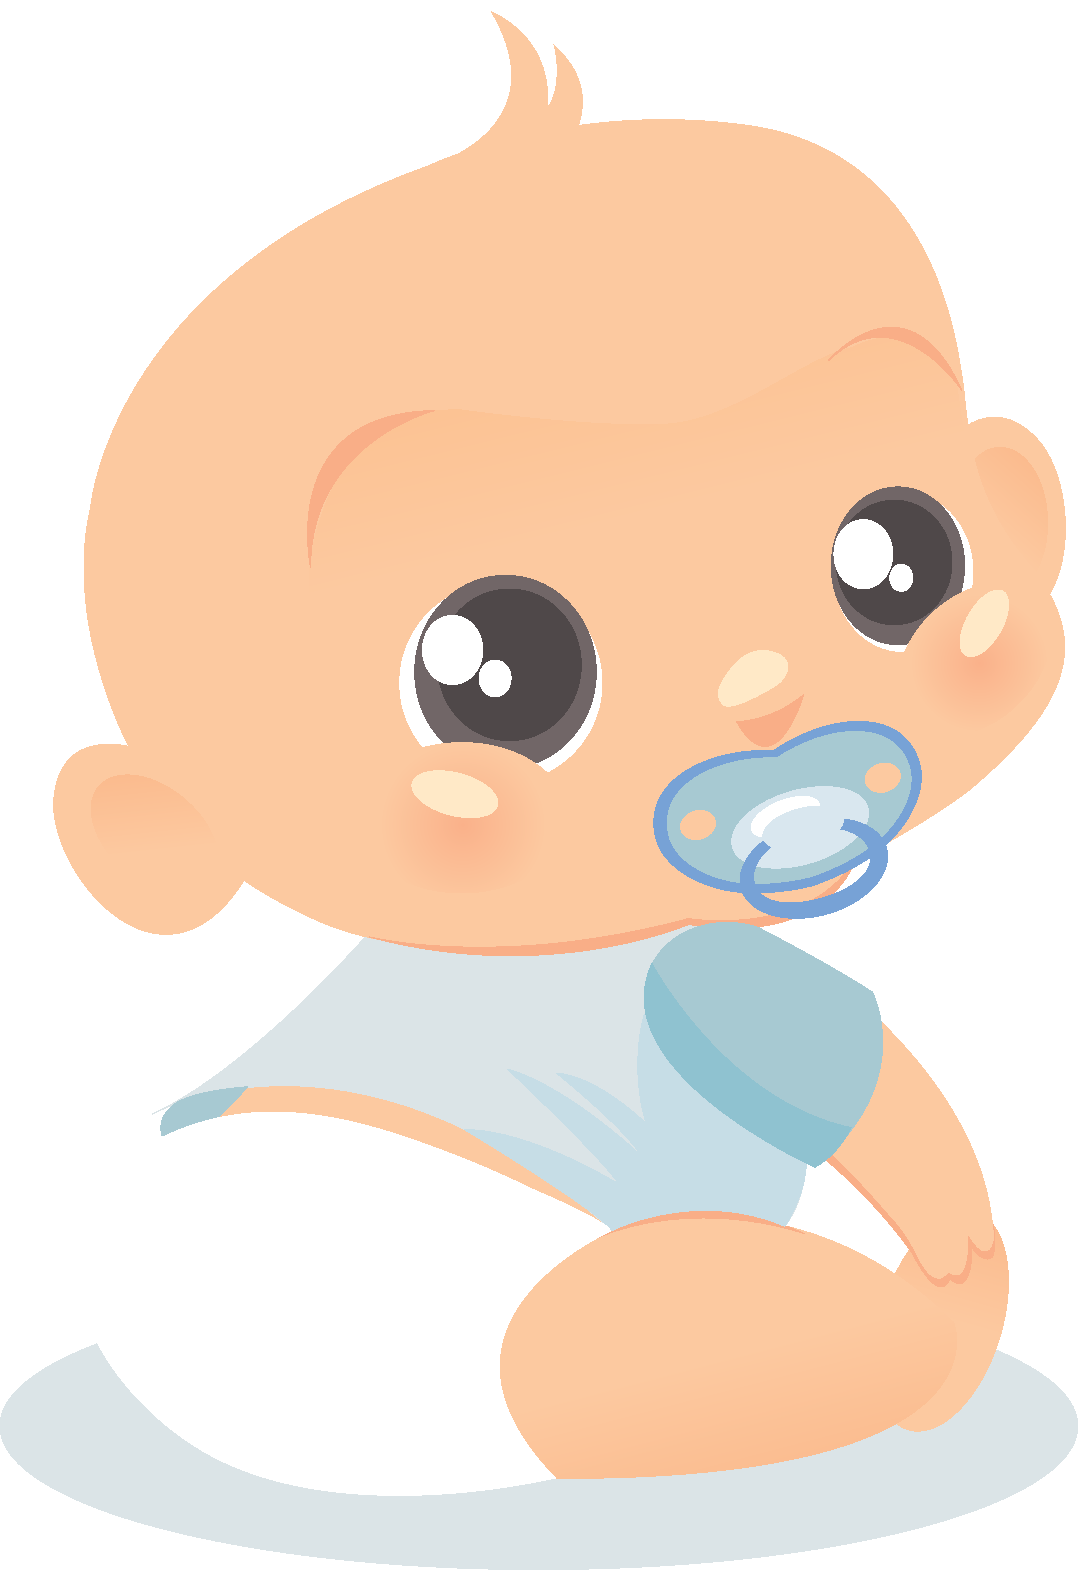 Baby, child PNG transparent image download, size: 1024x768px